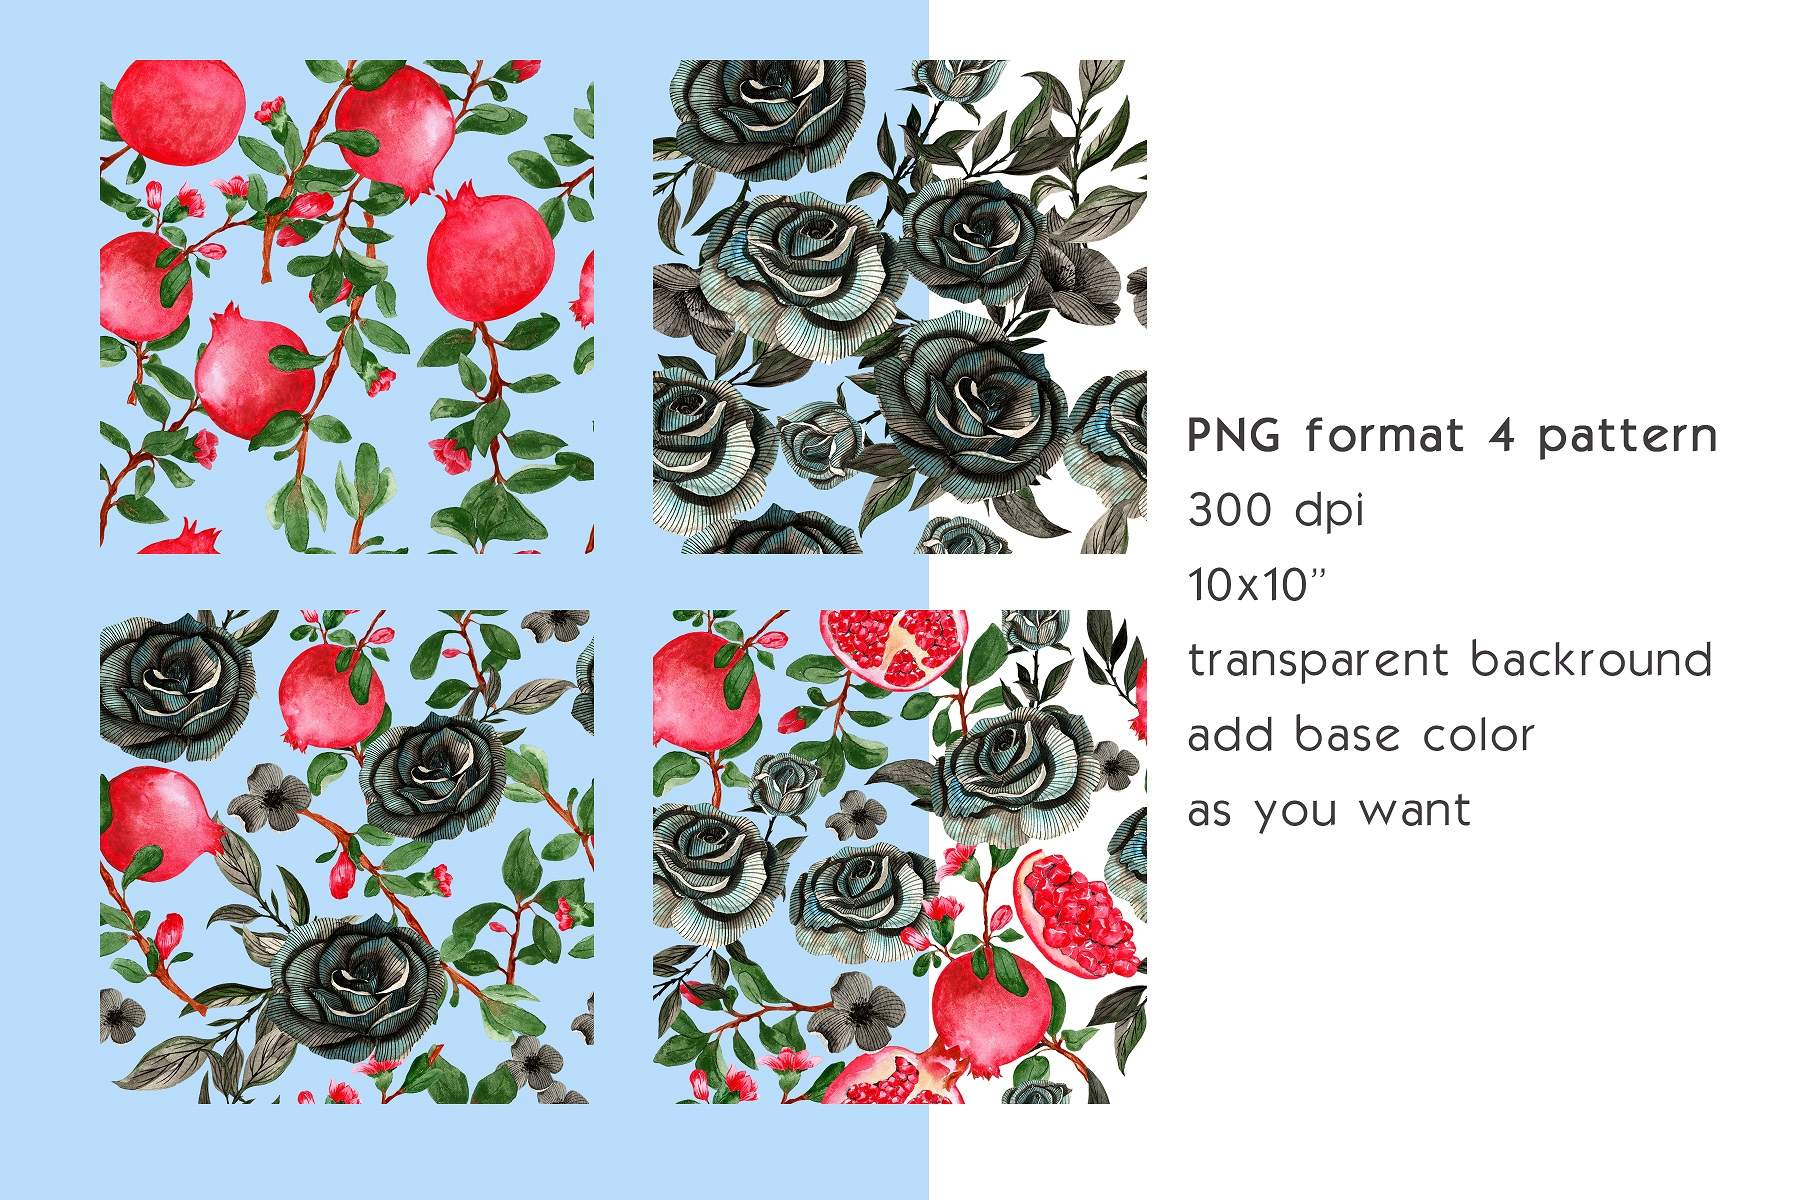 Four different images of roses and leaves on a blue background.